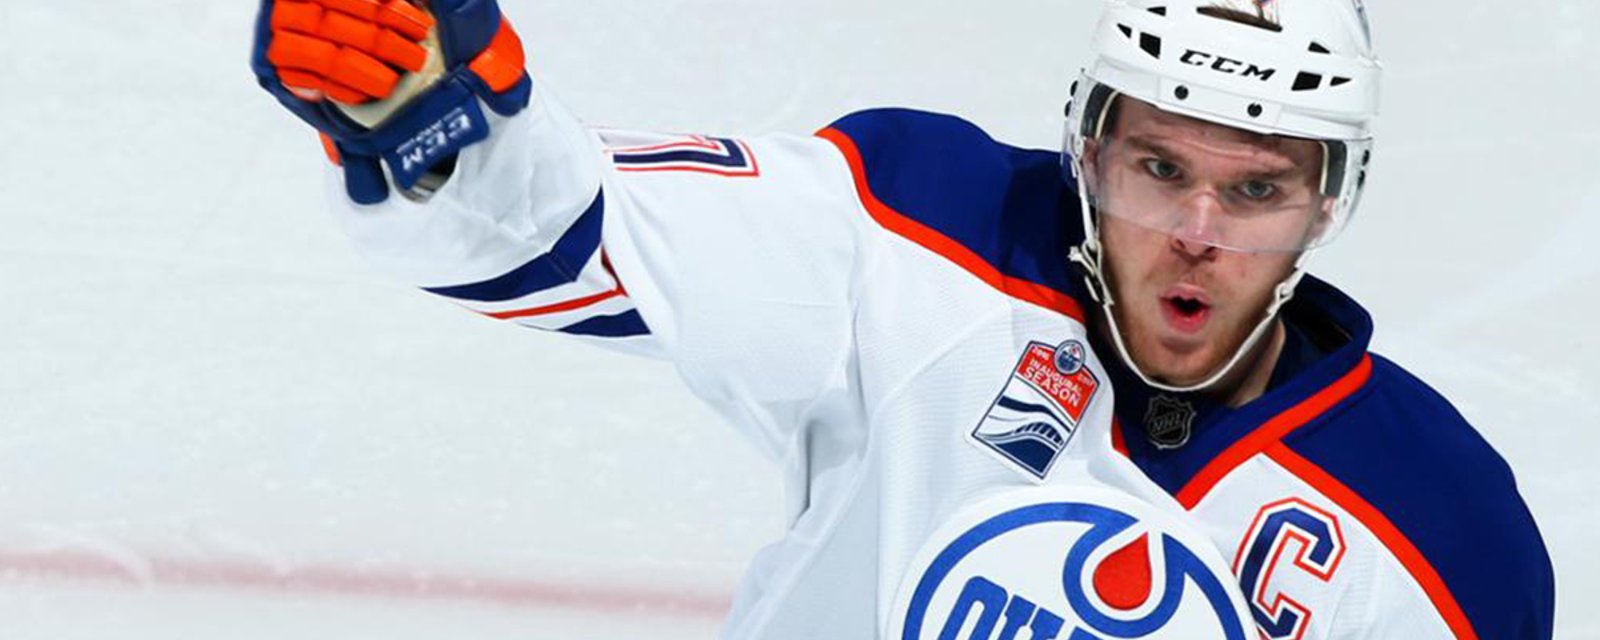 You won’t believe what McDavid did immediately after signing his $100 million deal